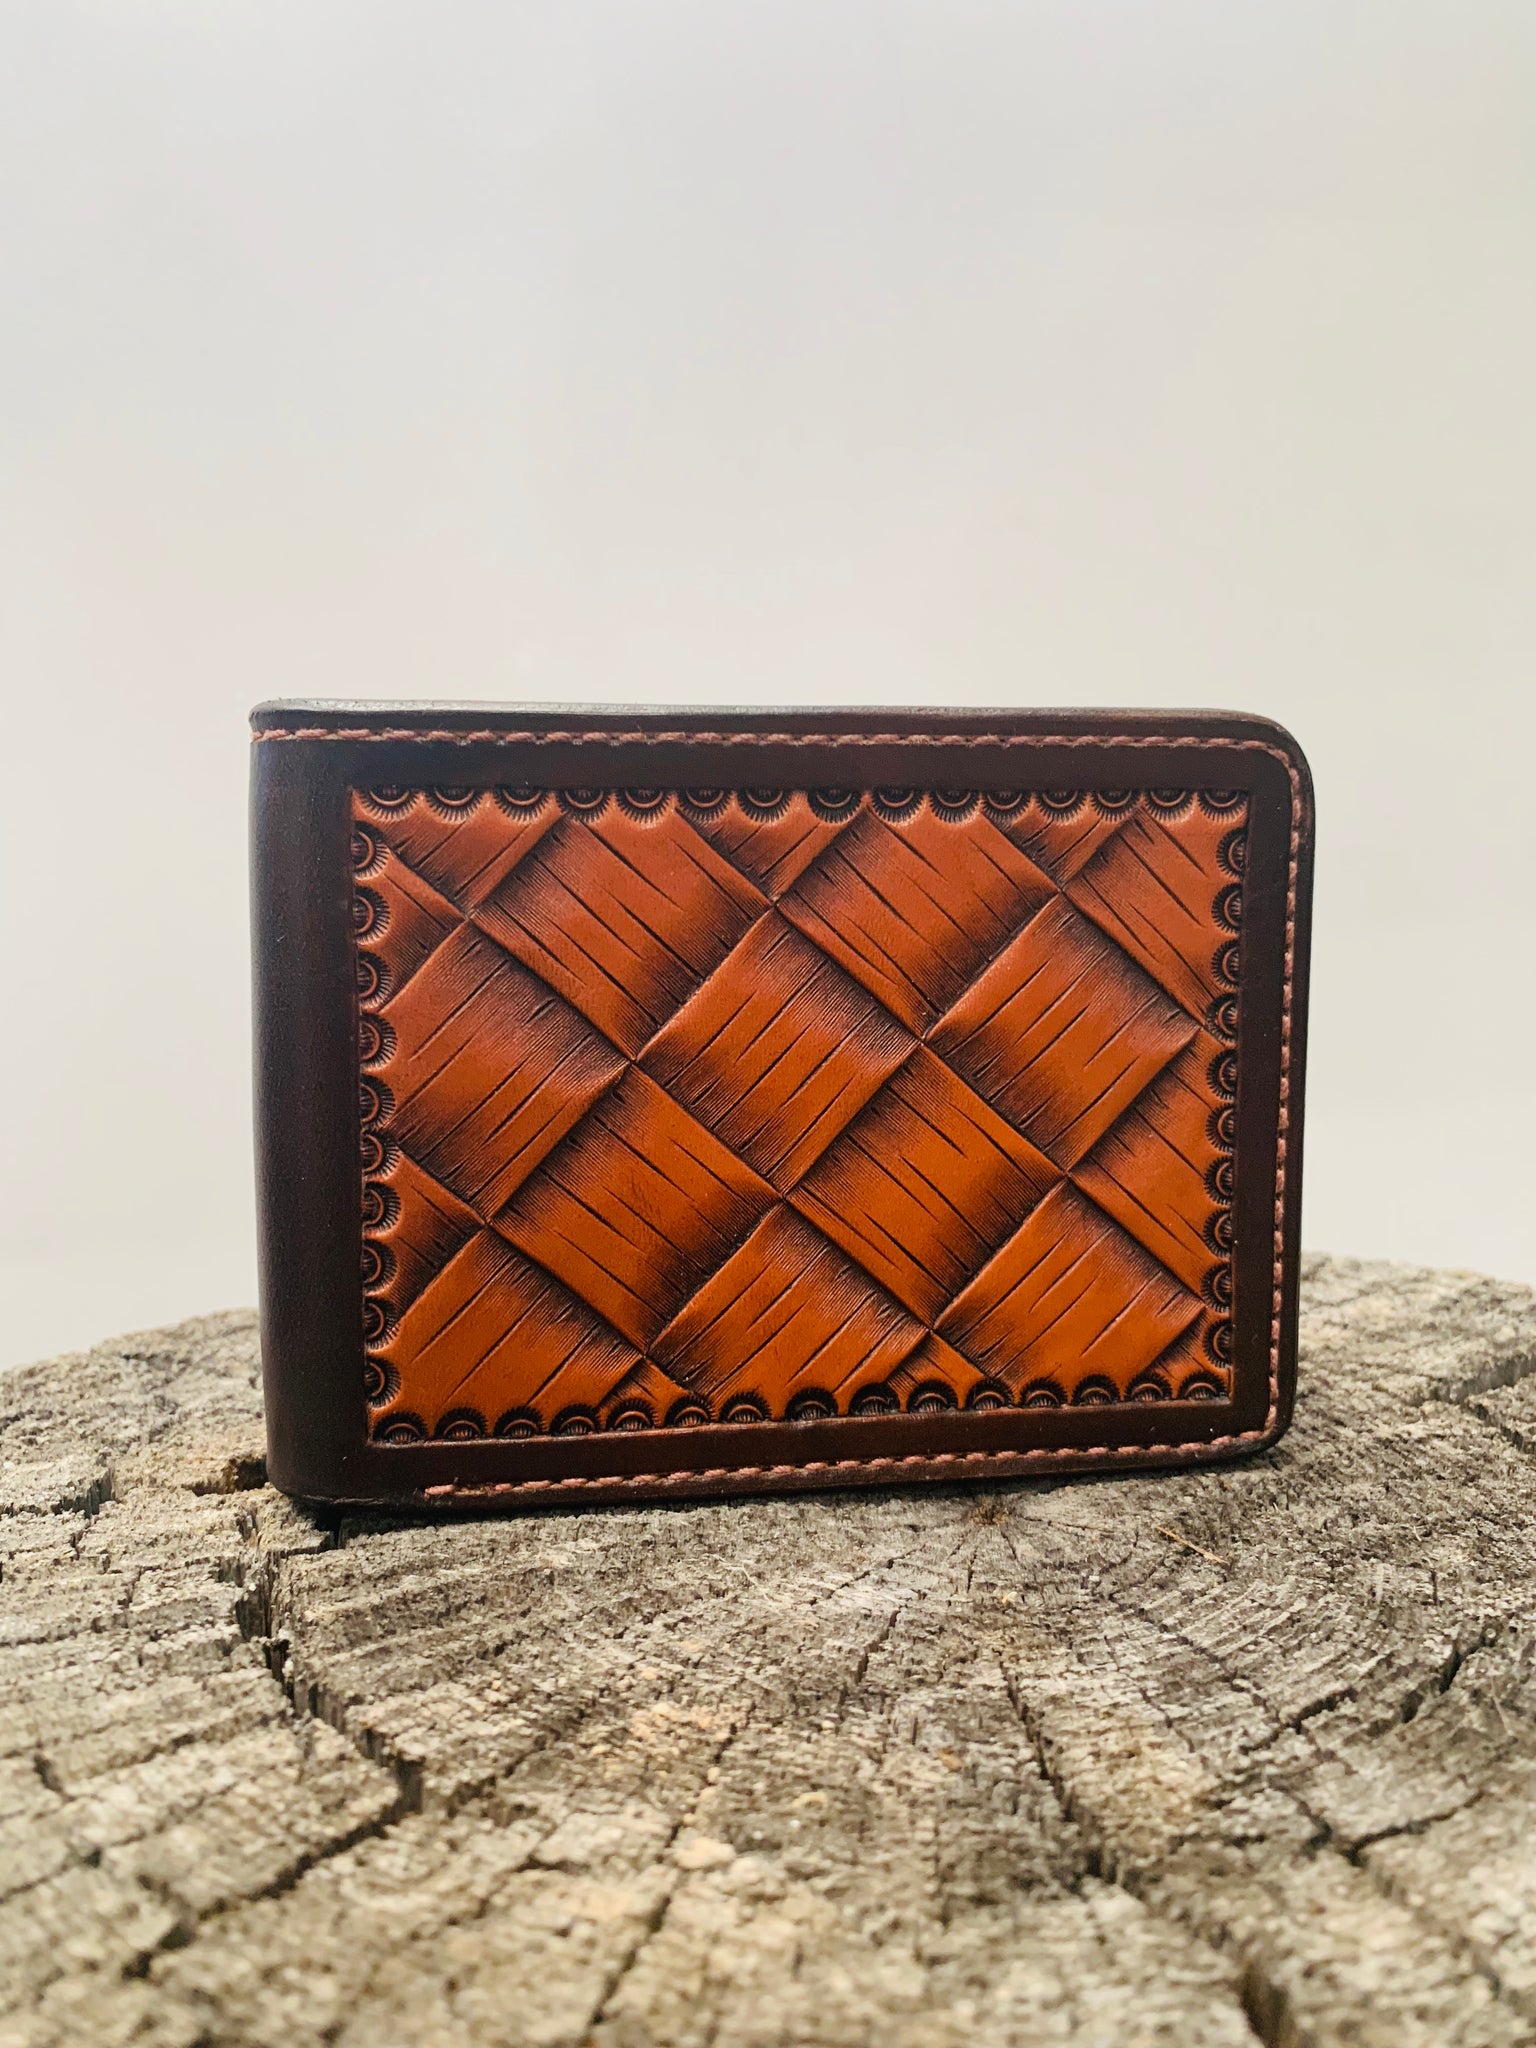 Handtooled Leather Wallets